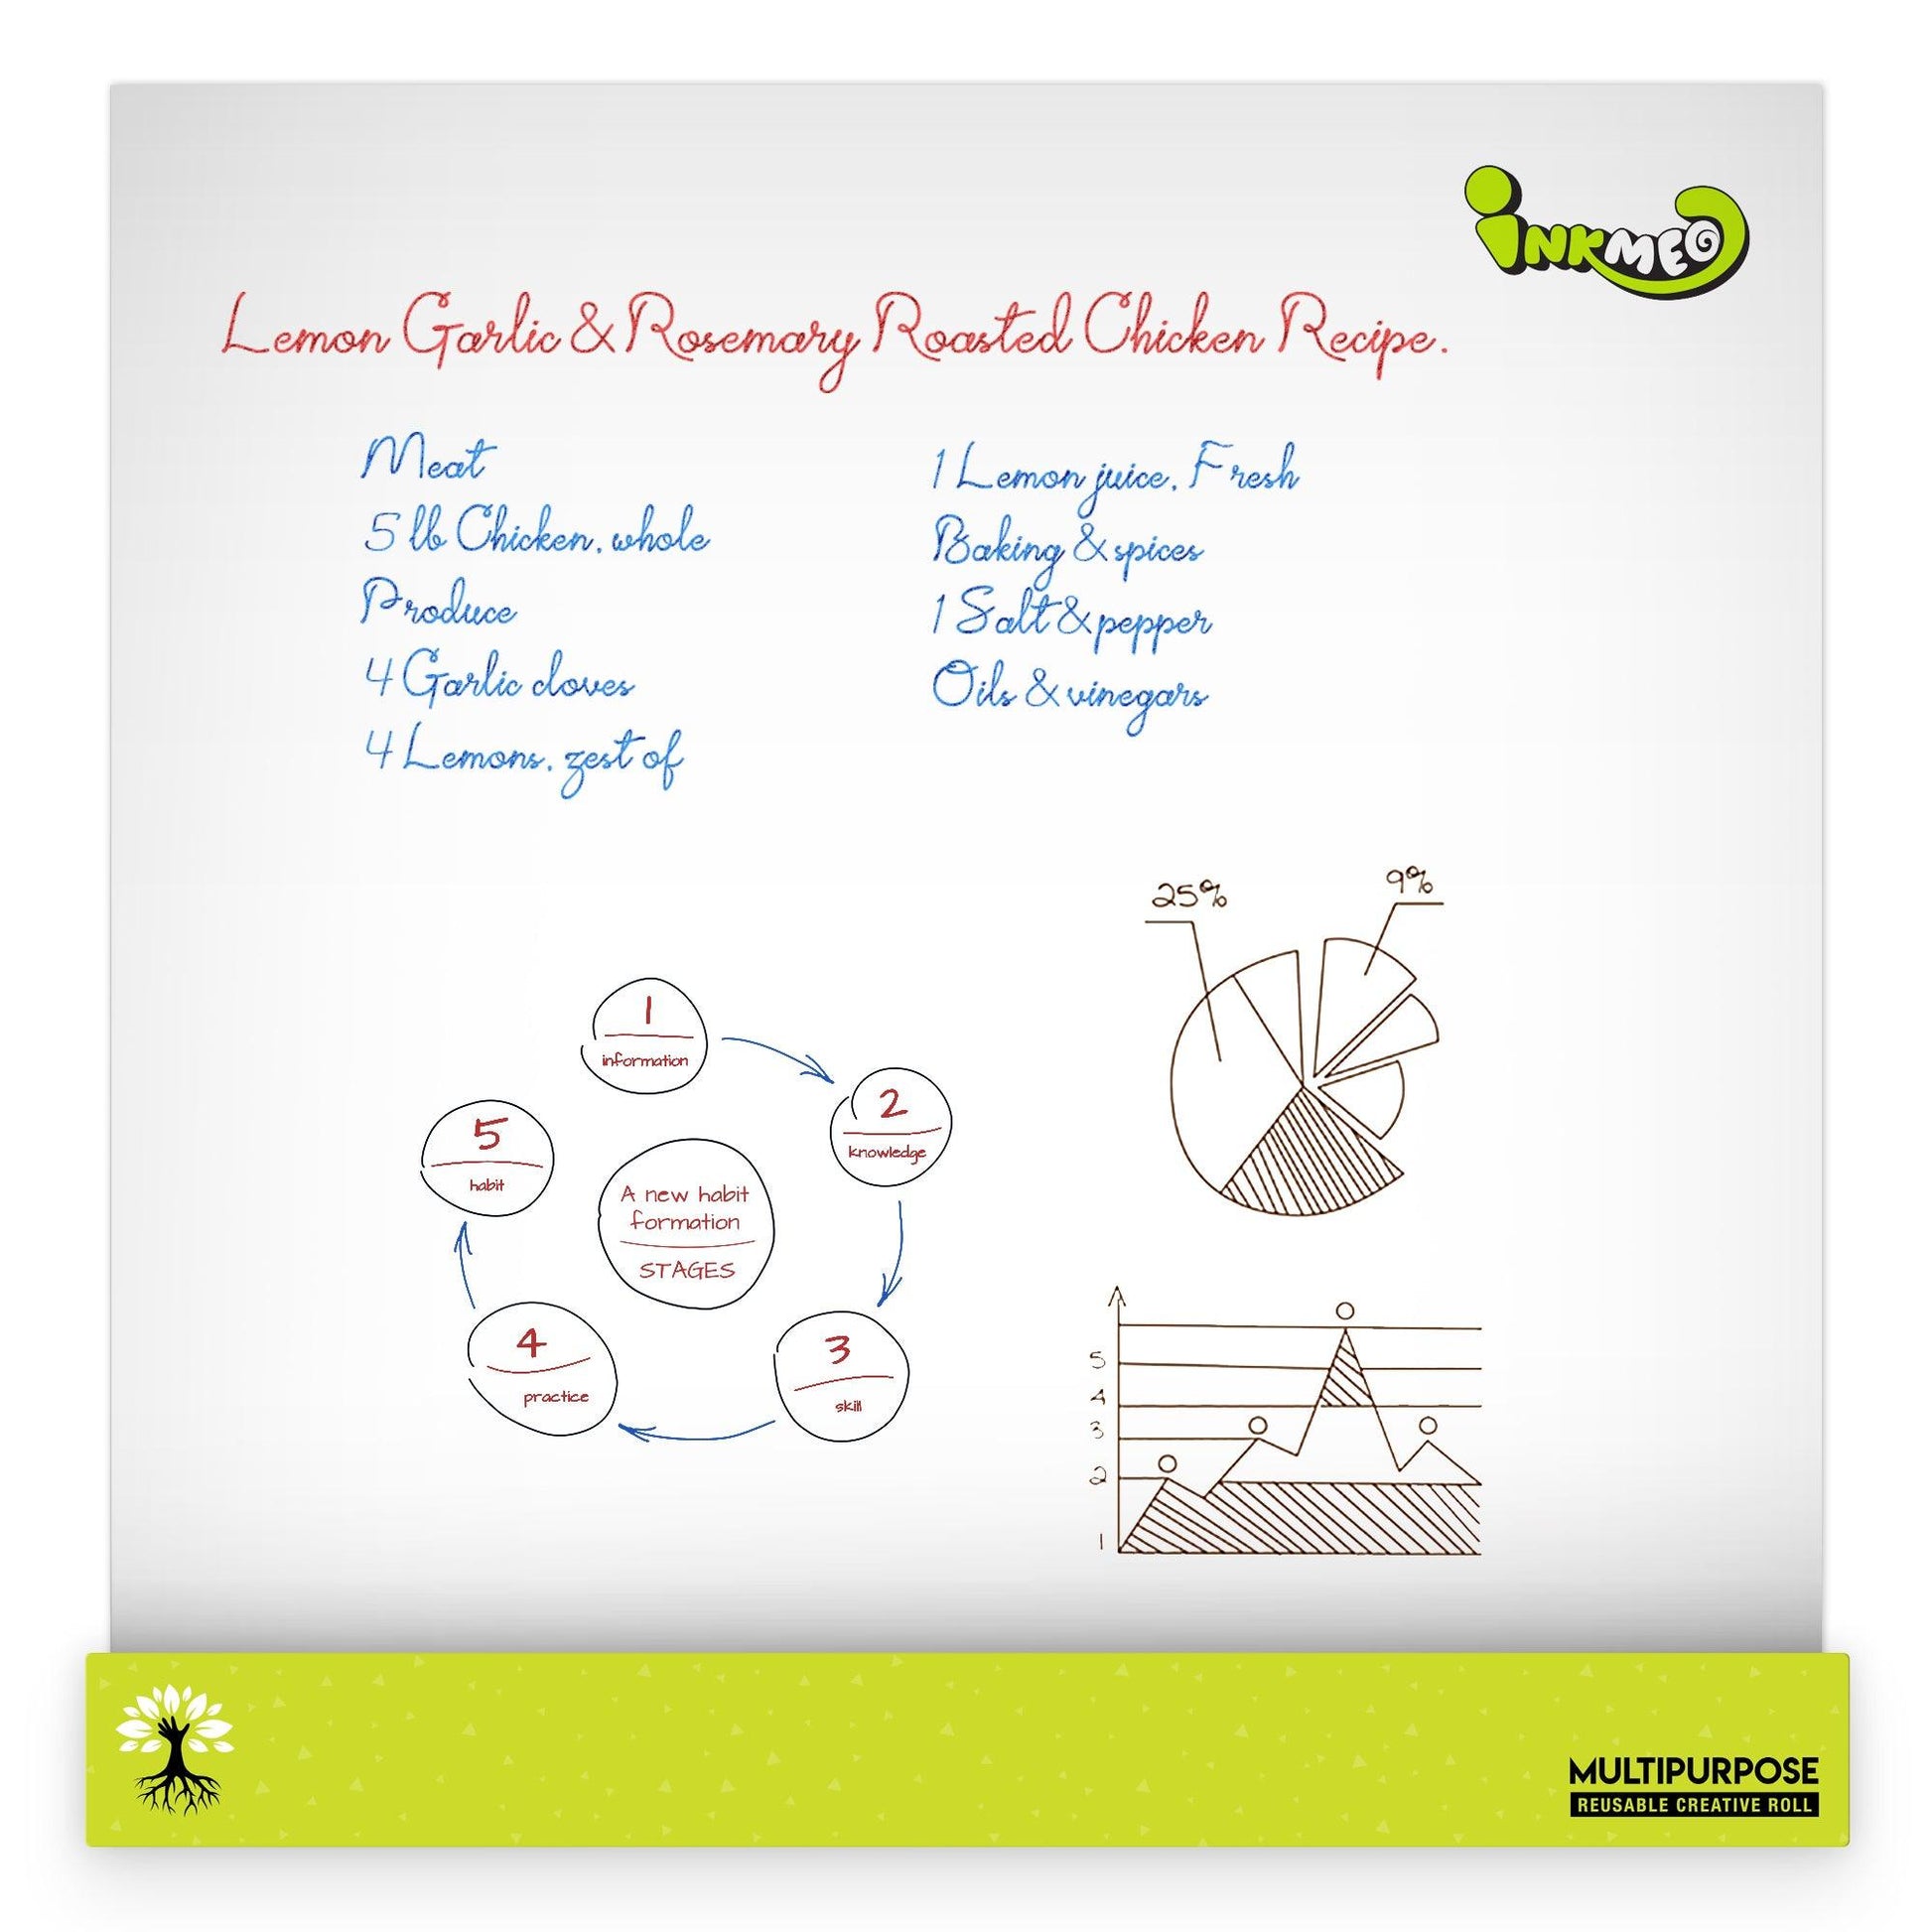 The image depicts a white paper with handwritten points, diagrams, and notes.